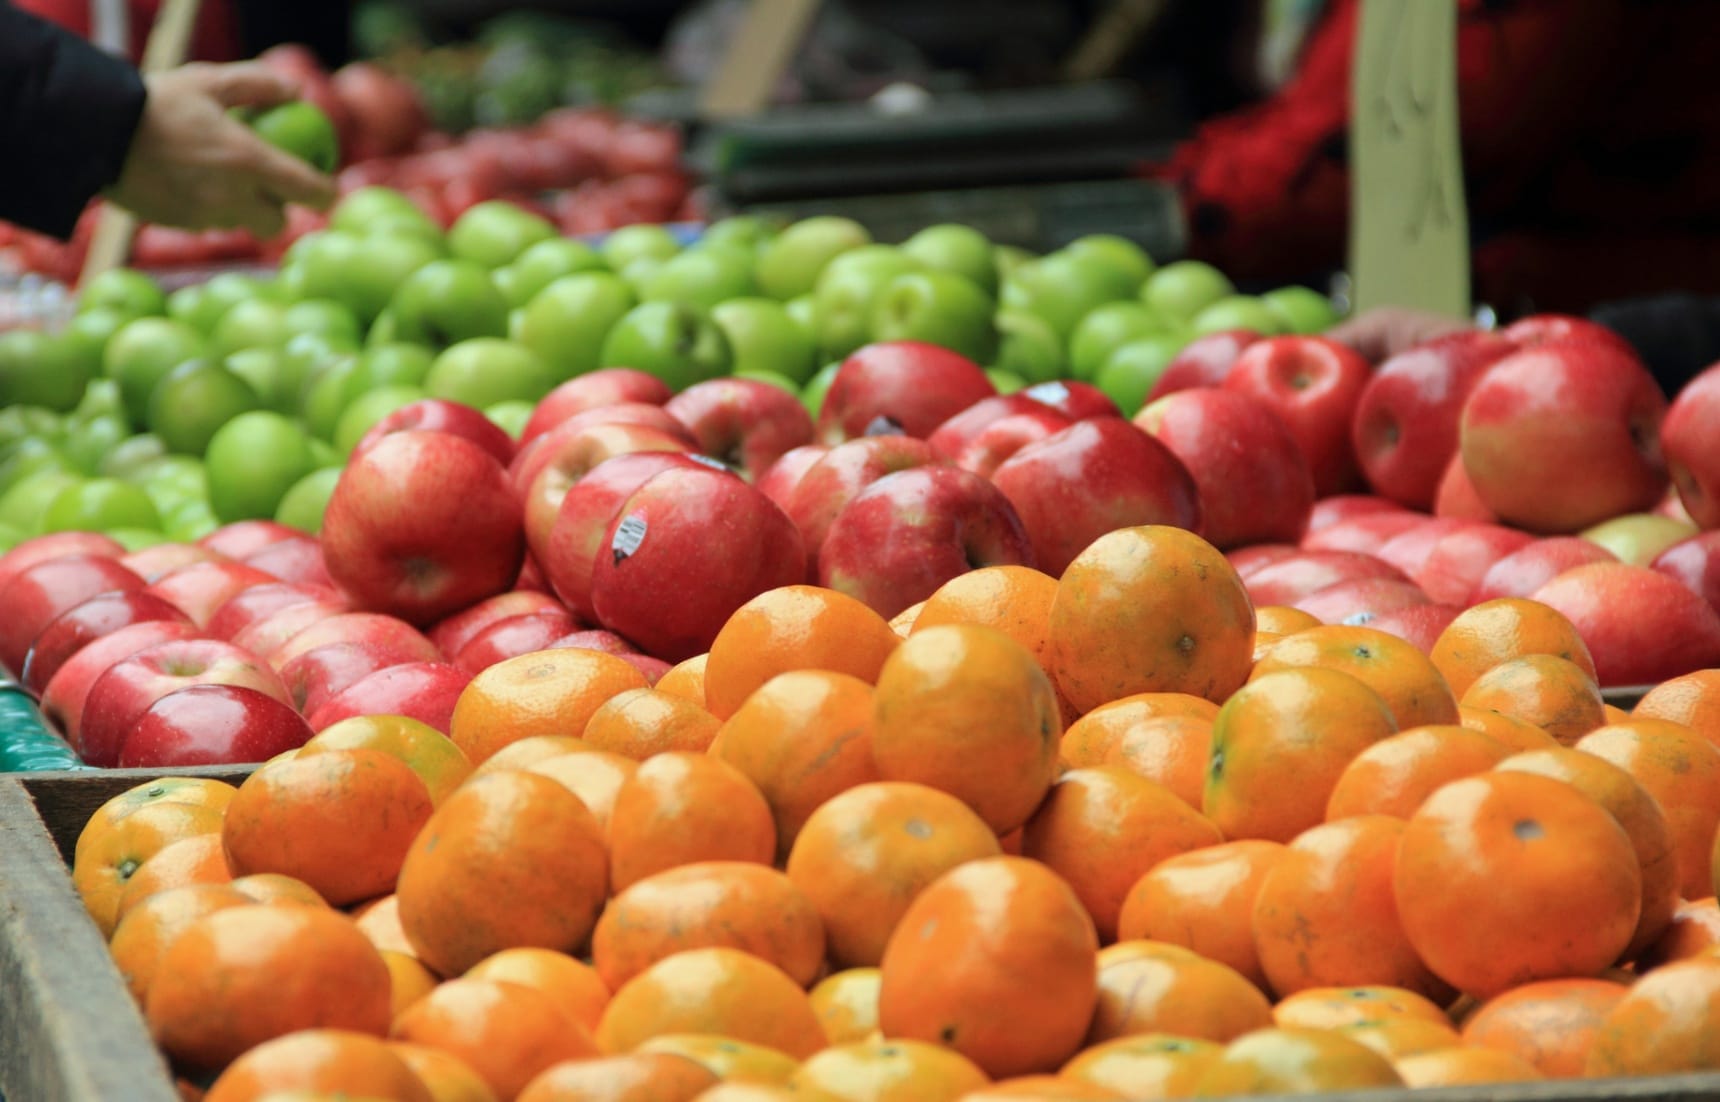 5 Fruit Markets for Budget Shoppers in Kansai